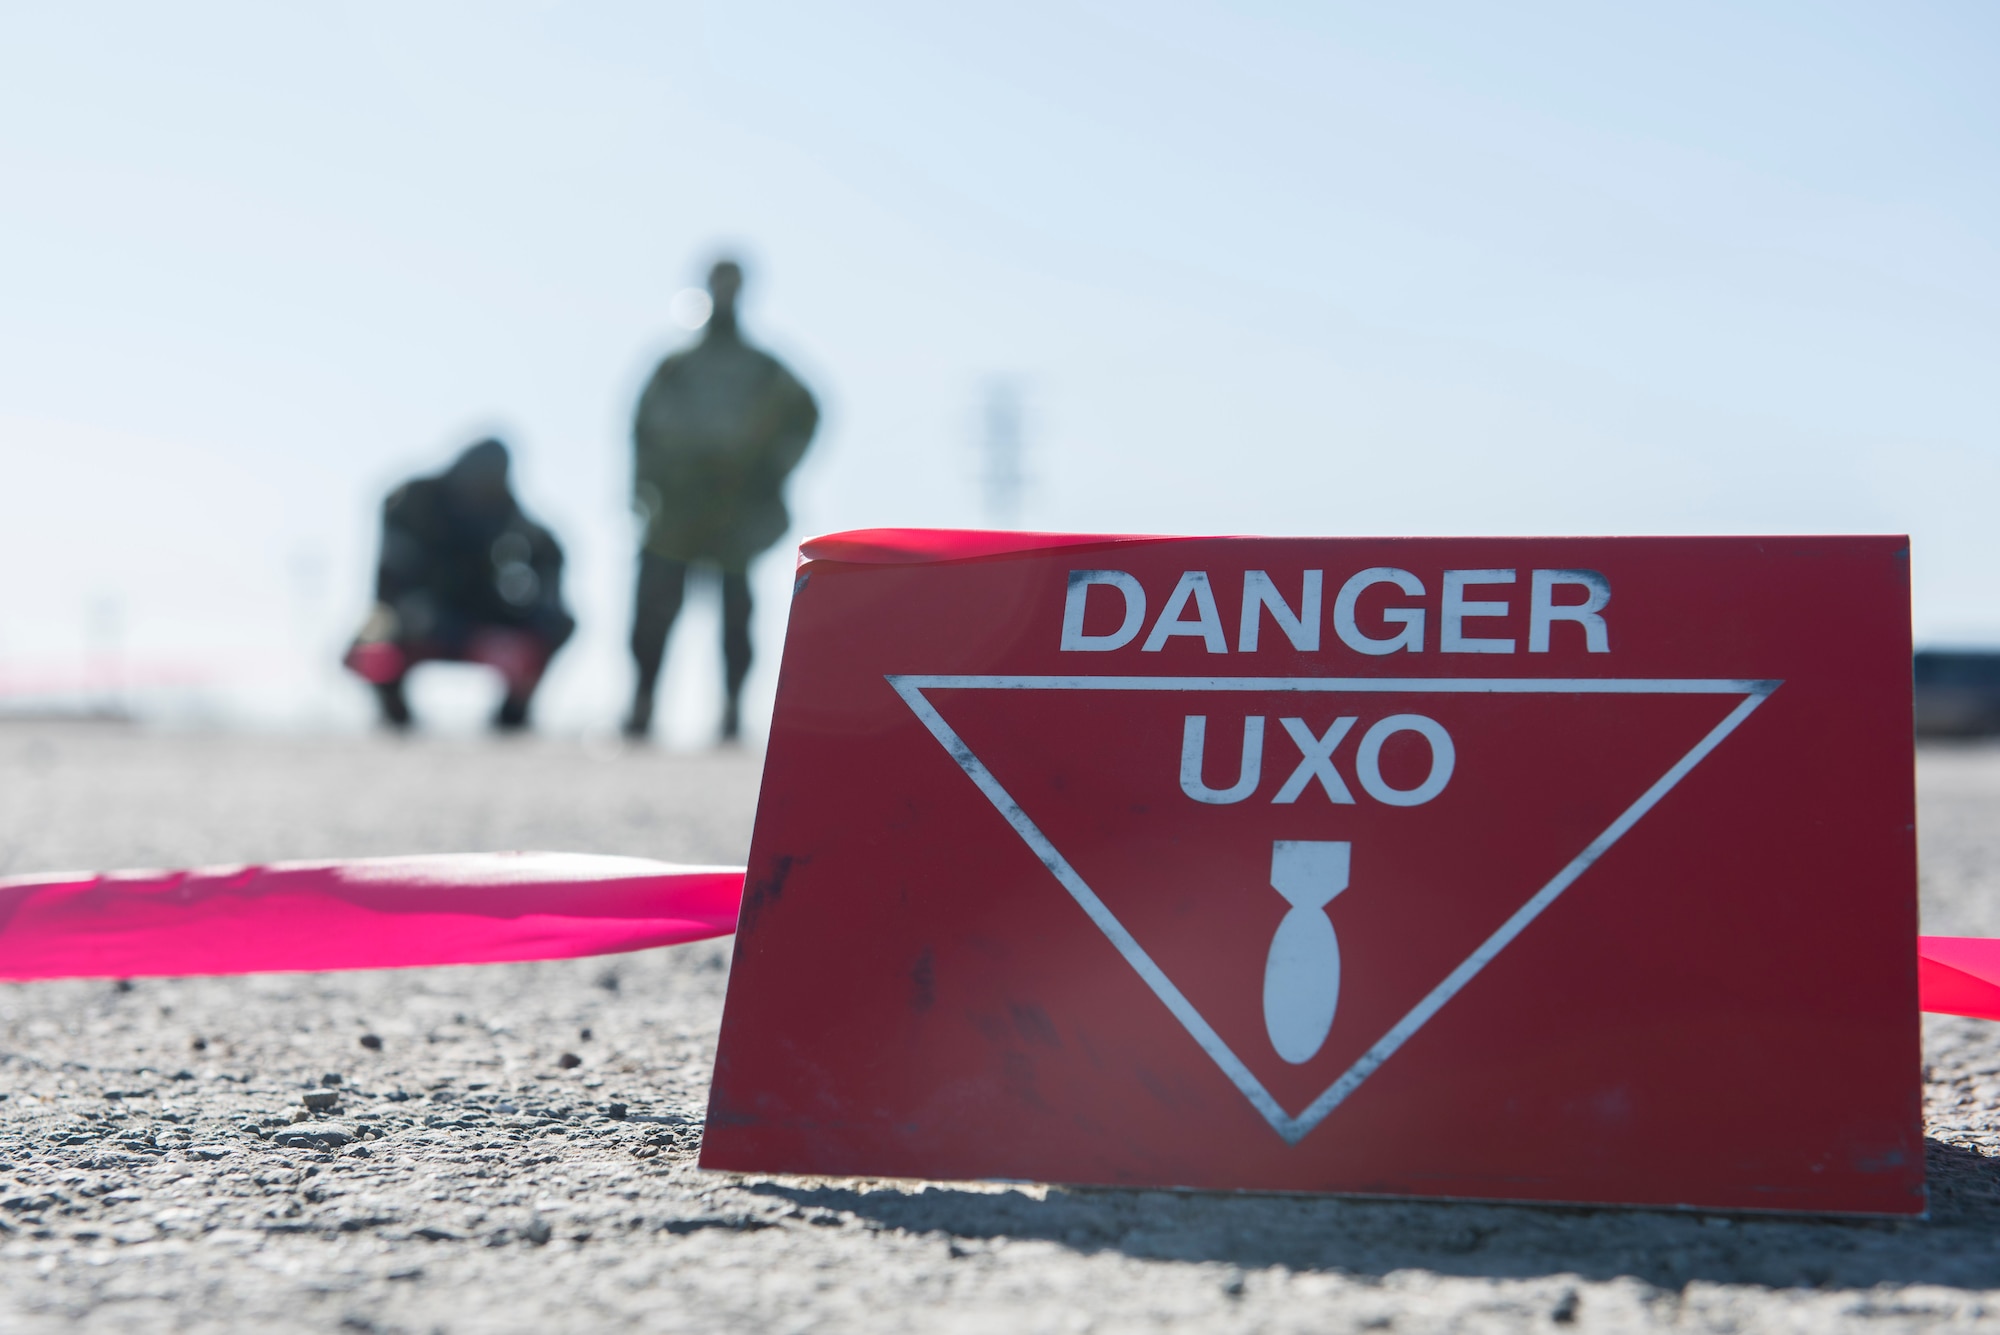 Danger signs surround an unexploded ordnance during exercise Polar Force at Joint Base Elmendorf-Richardson, Alaska, April 3, 2019. Polar Force is a two-week exercise designed to test JBER’s mission readiness, and develops the skills service members require to face adverse situations.